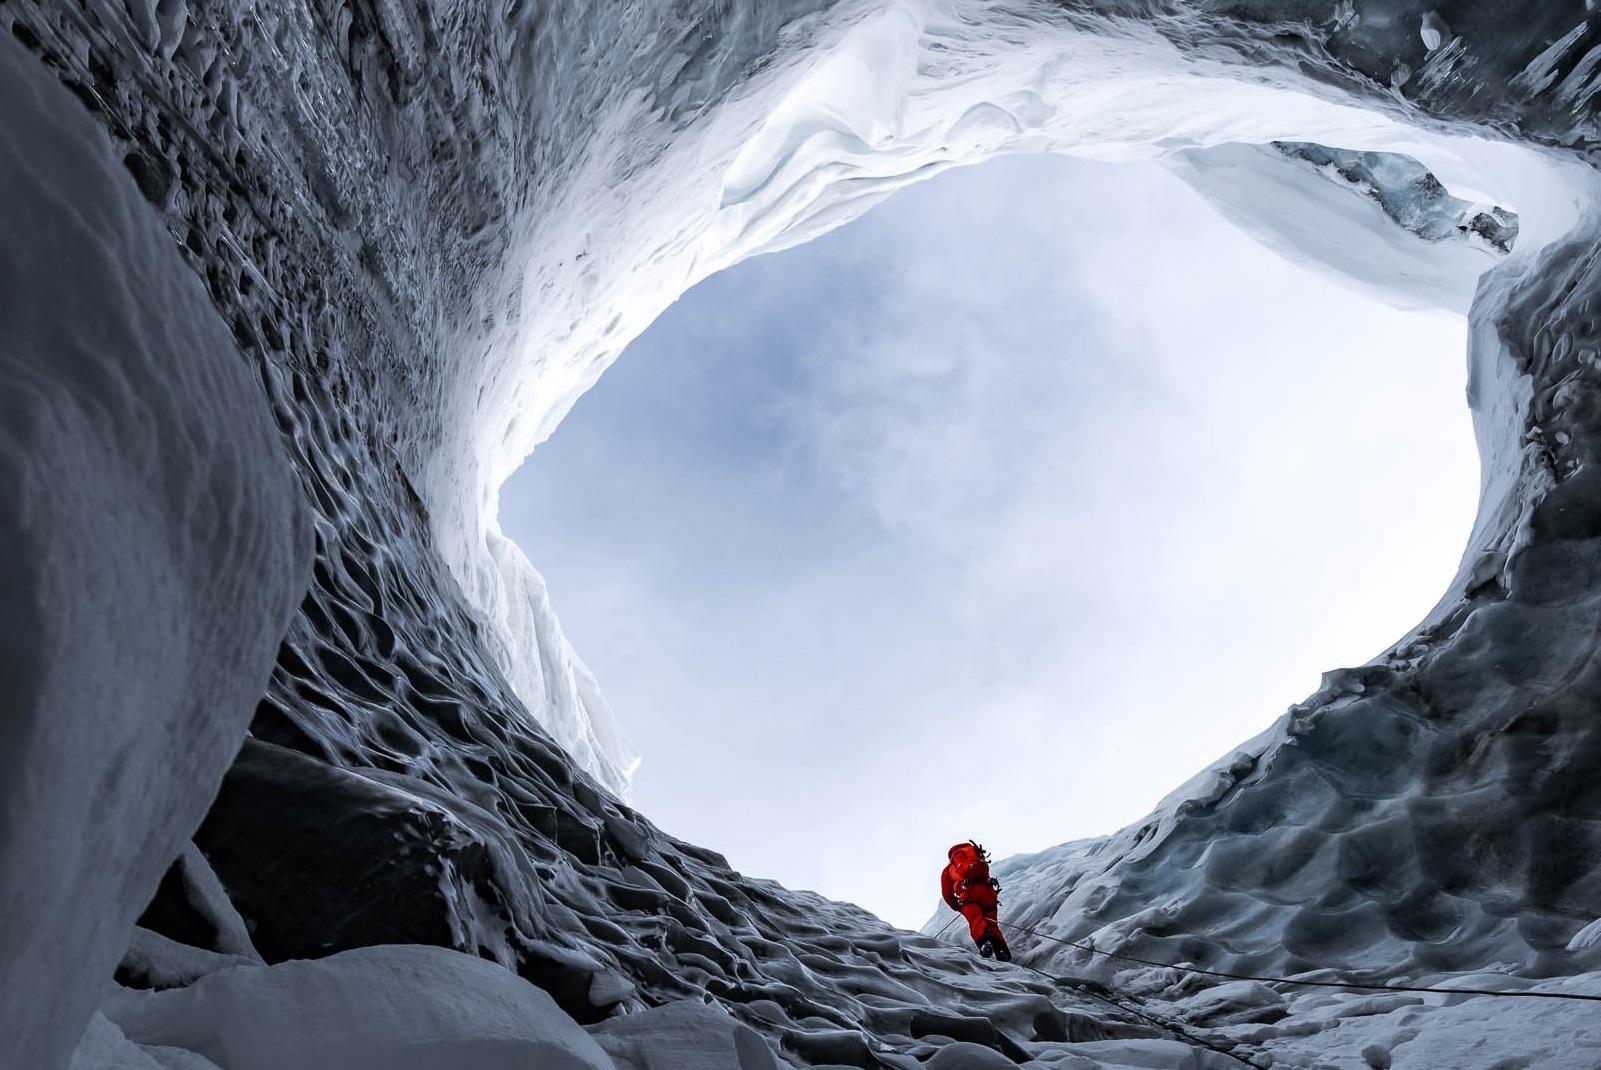 Seen from below, man stands at edge of large hole in glacier